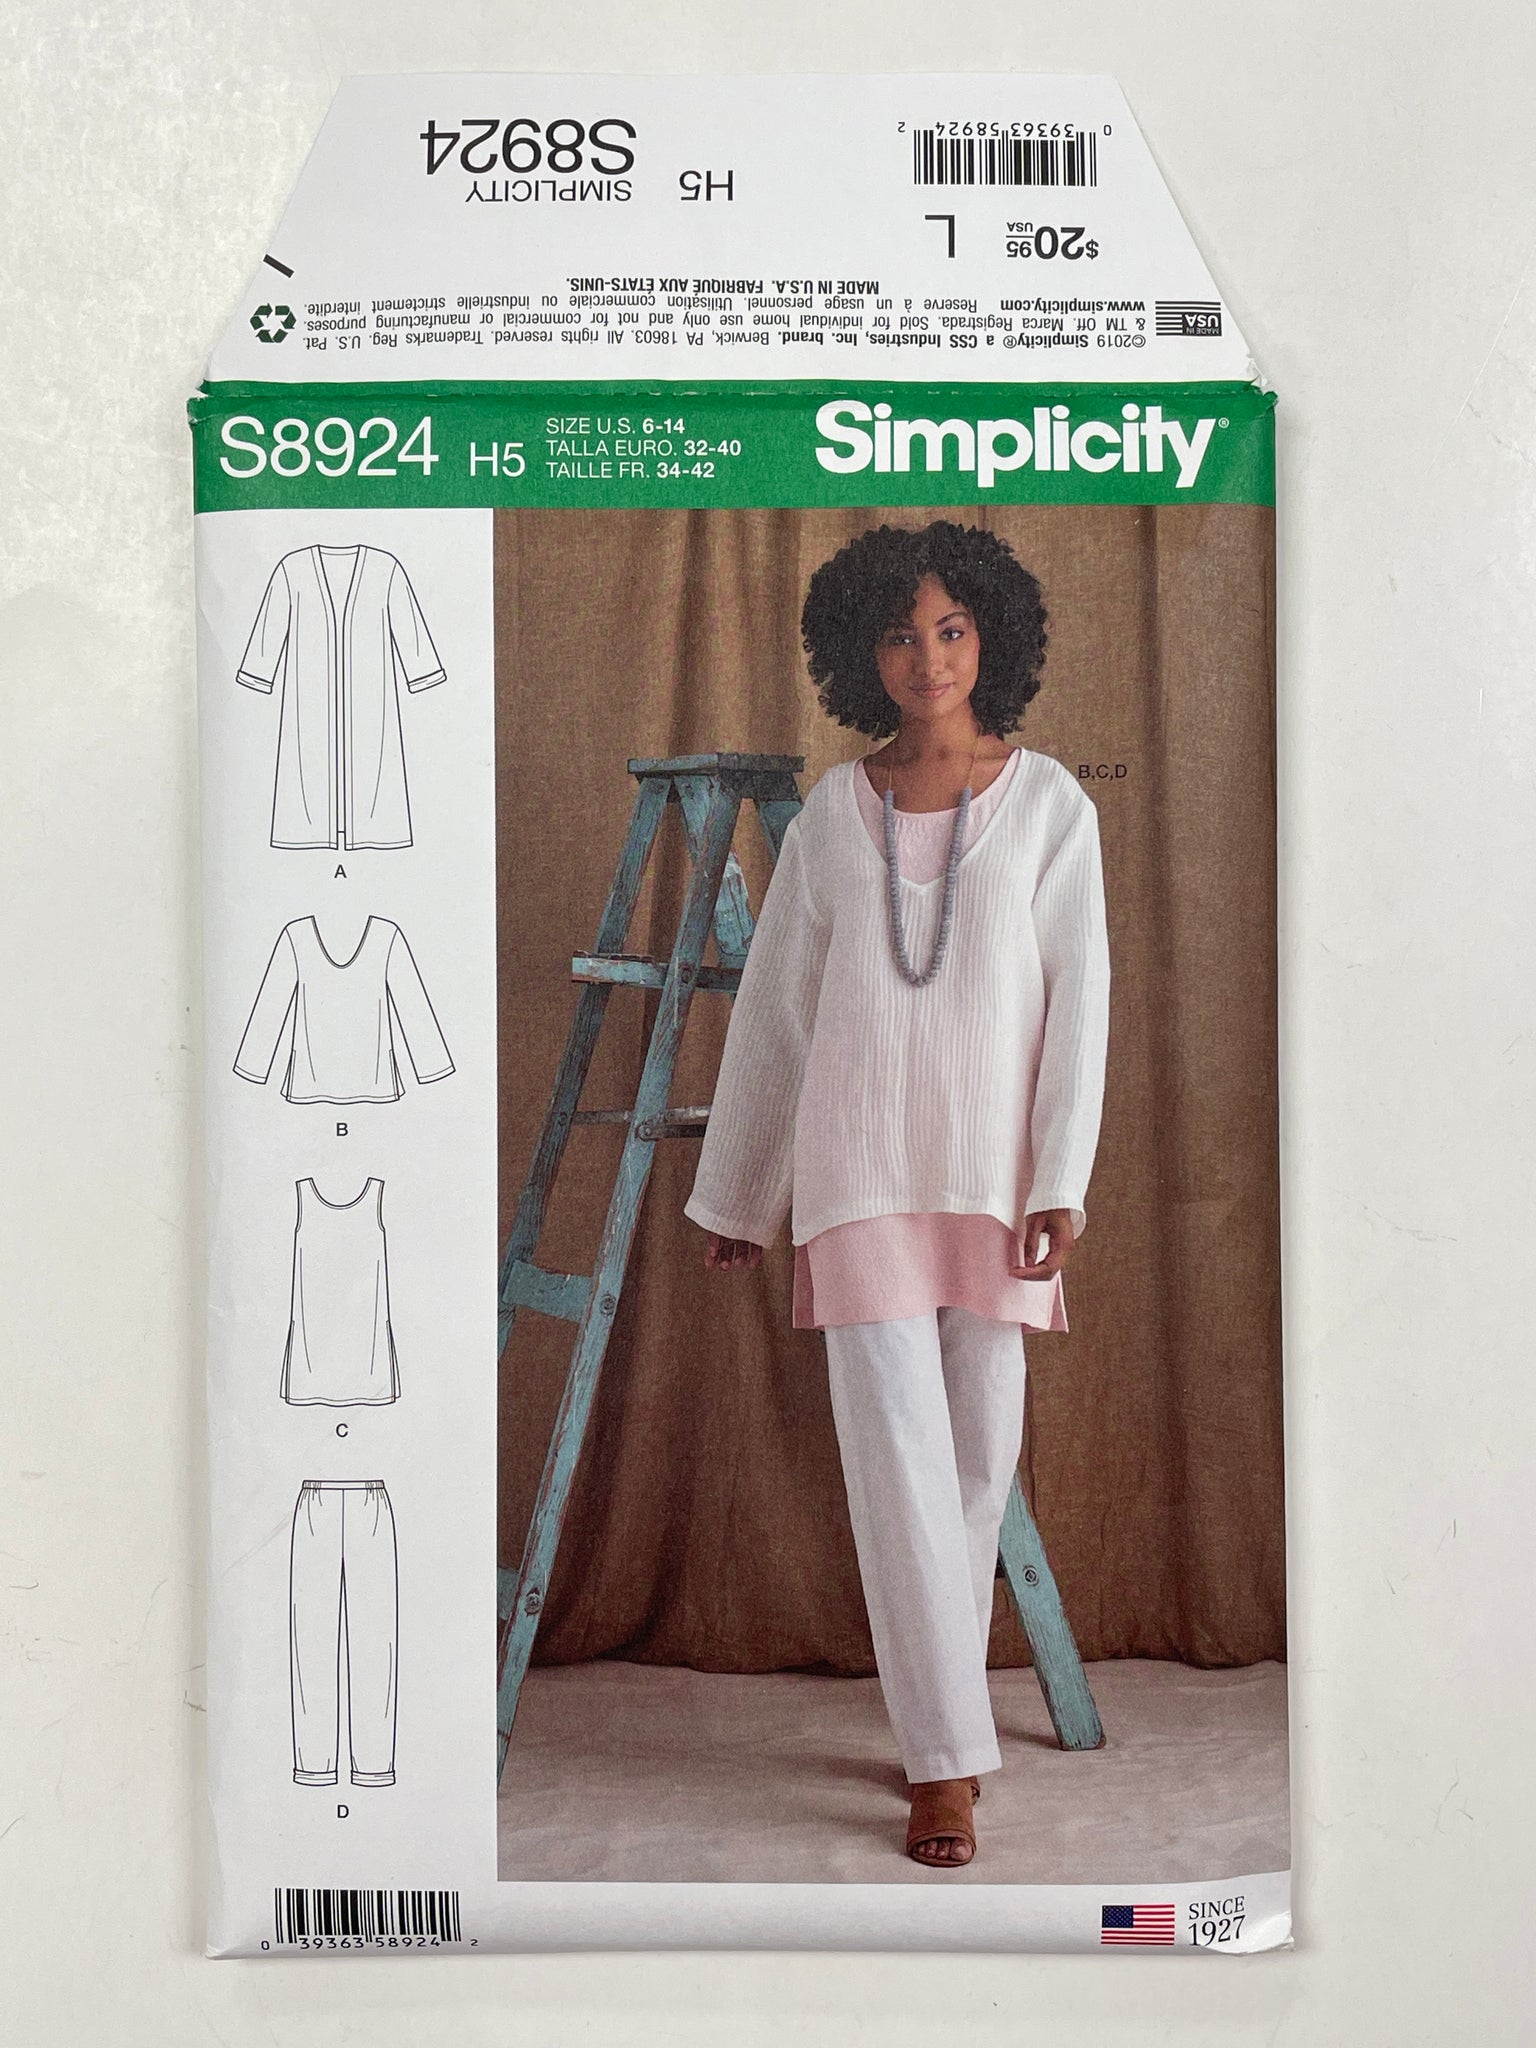 2019 Simplicity 8924 Sewing Pattern - Jacket, Top, Tunic and Pants FACTORY FOLDED